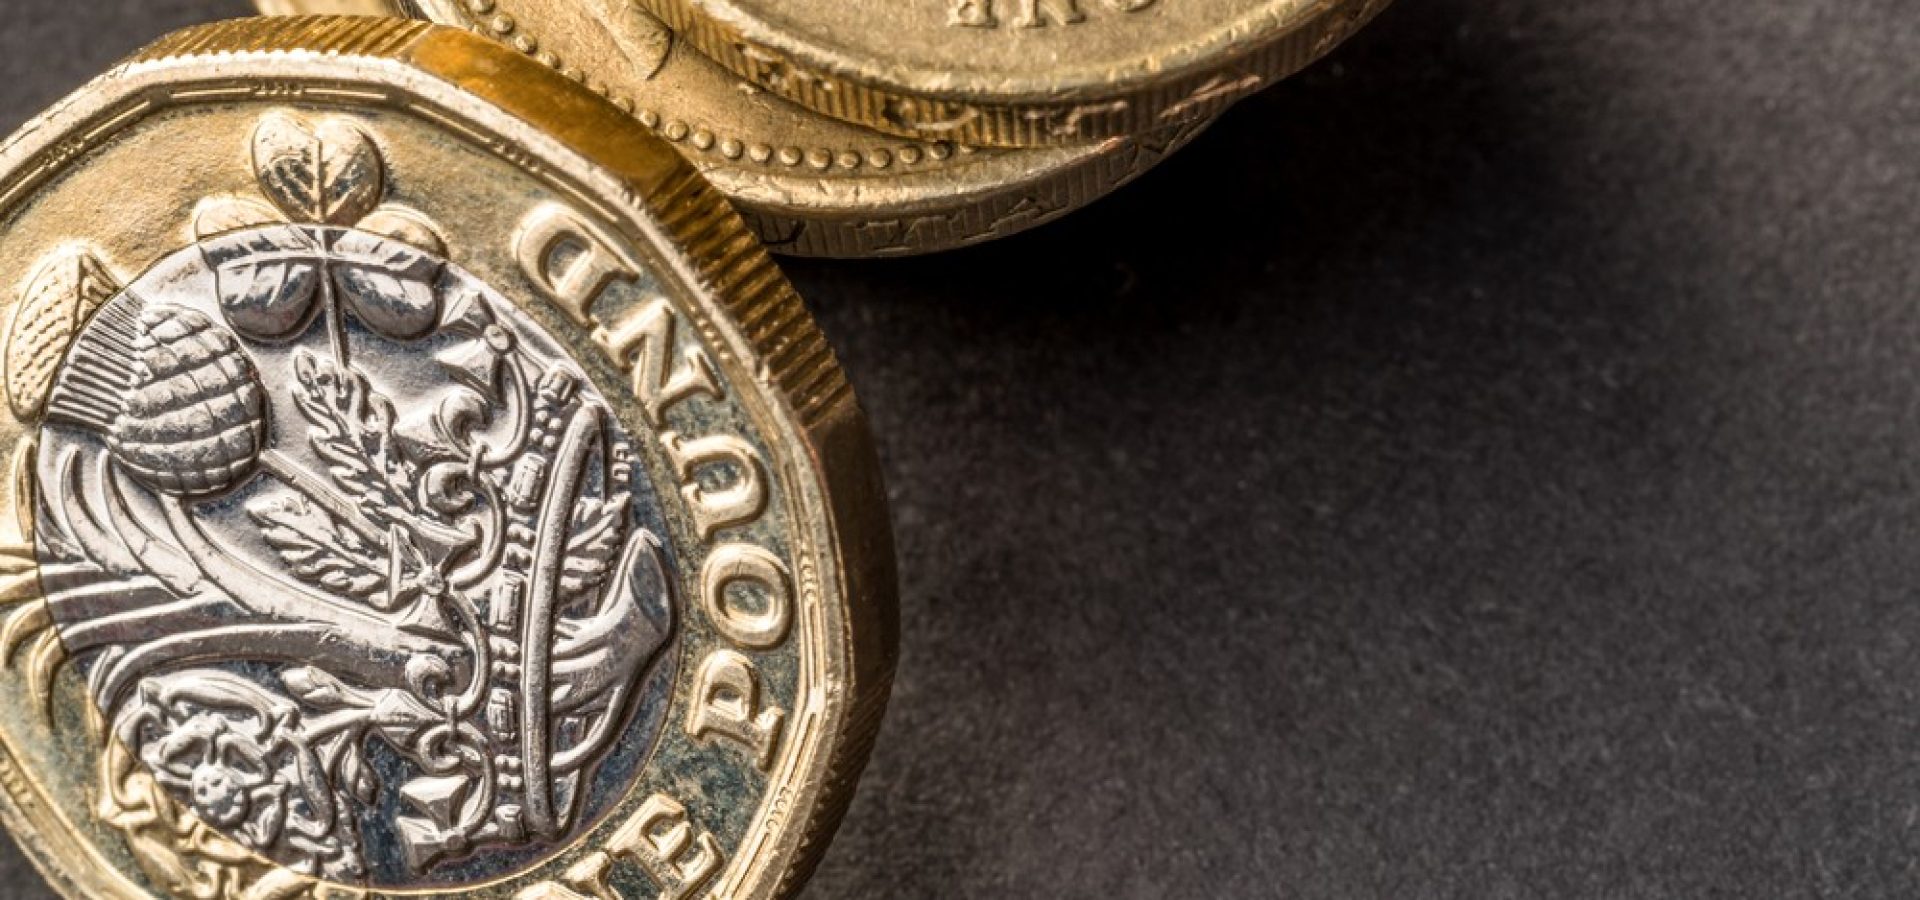 Wibest – USD GBP: A stack of British pound sterling coins.